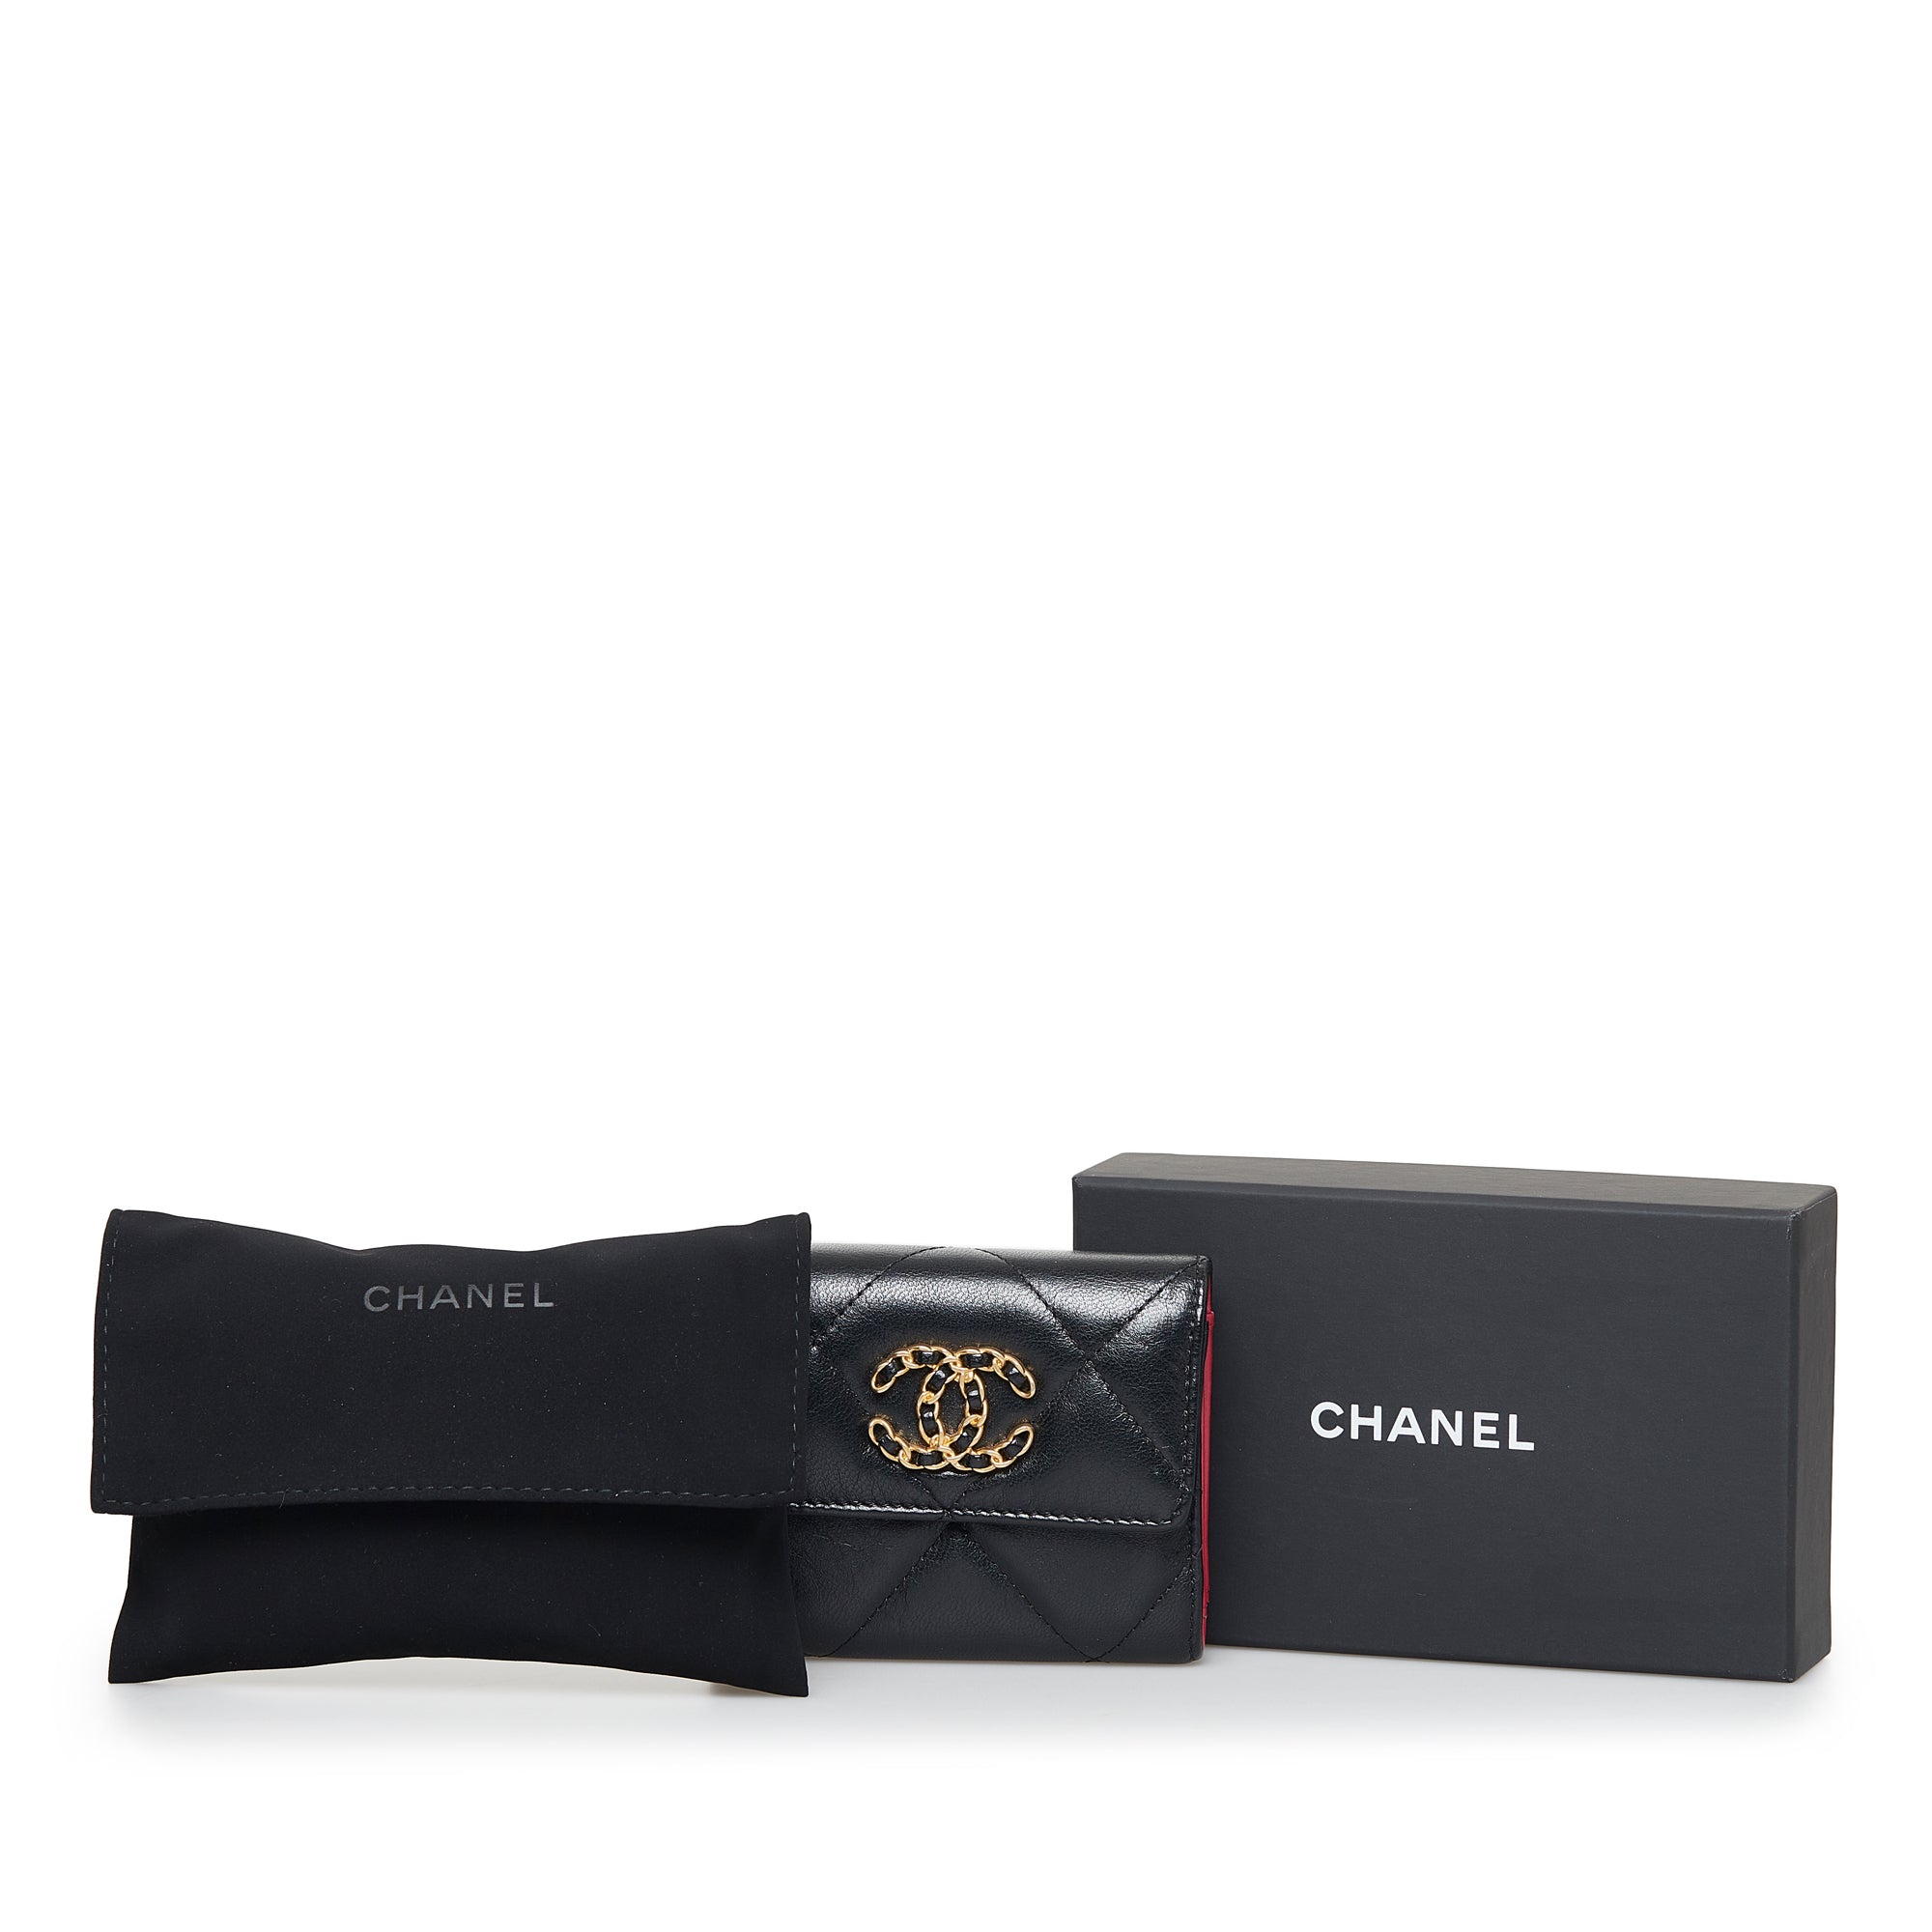 CHANEL Chanel 19 Trifold Wallet Black - Vault 55